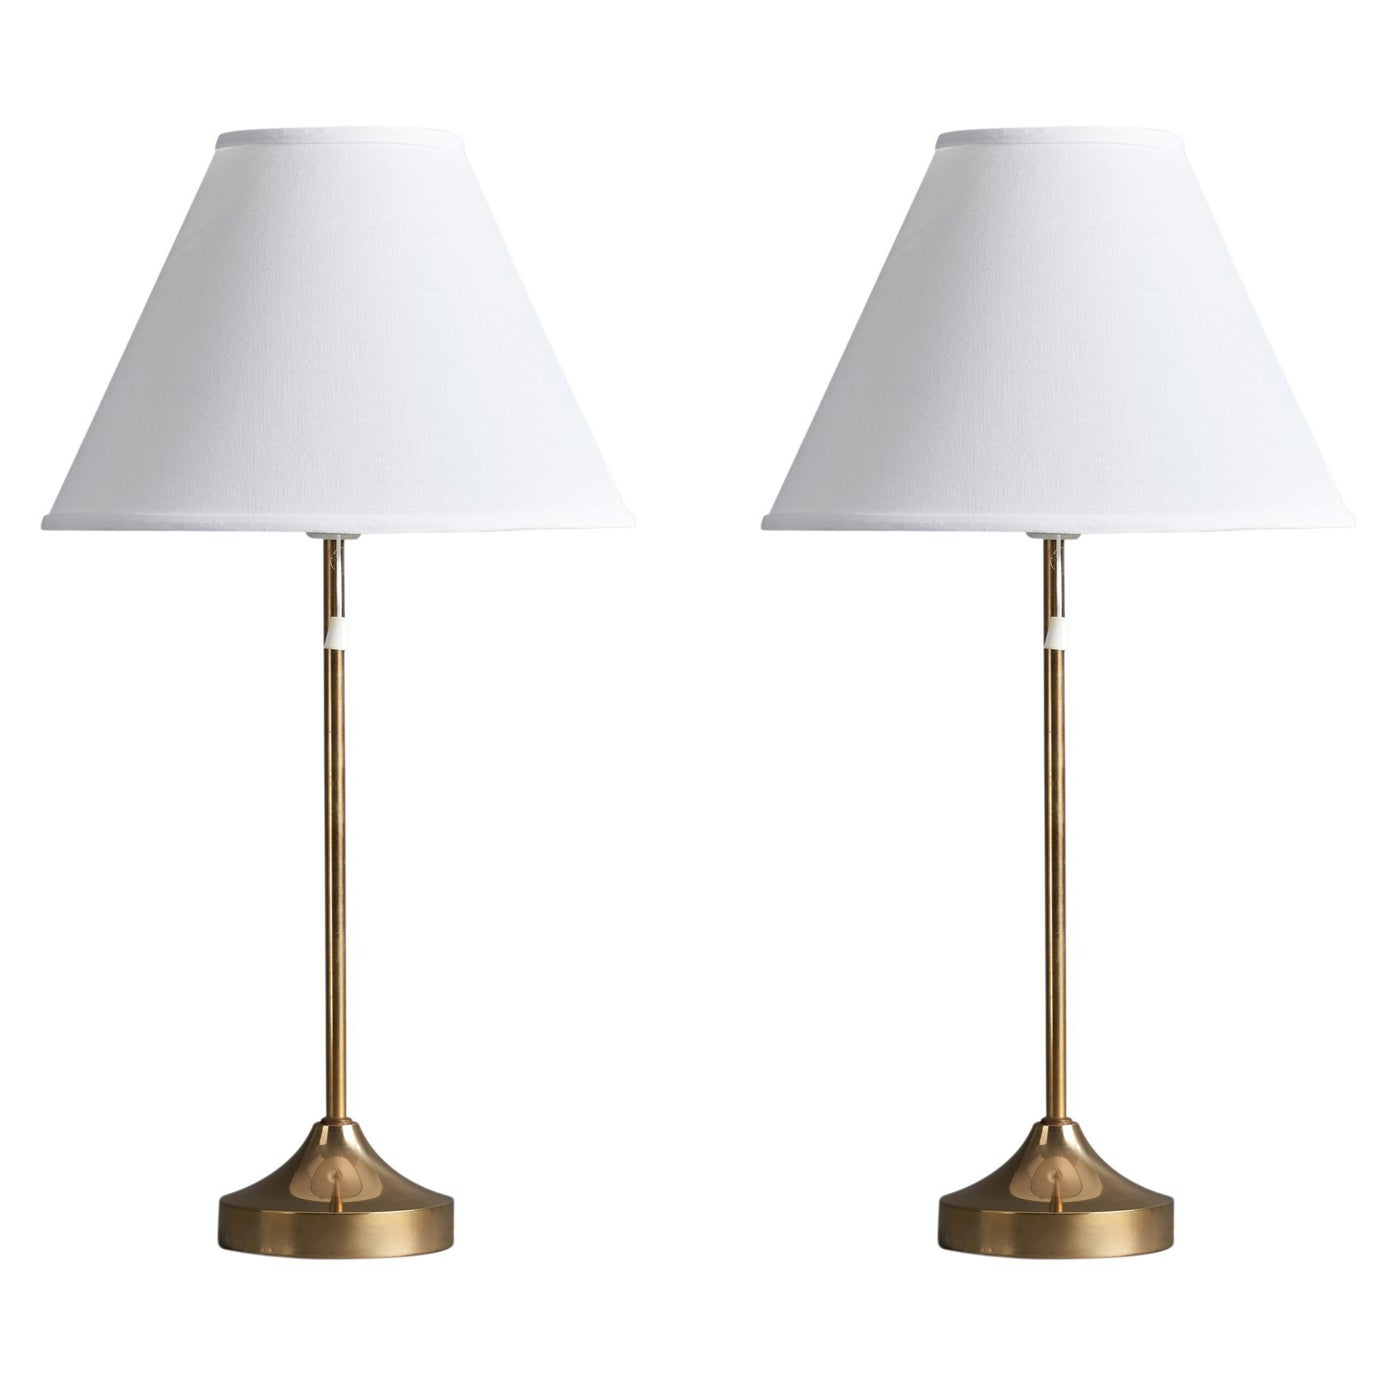 Nybro Armaturfabrik, Table Lamps, Brass, Sweden, 1940s For Sale